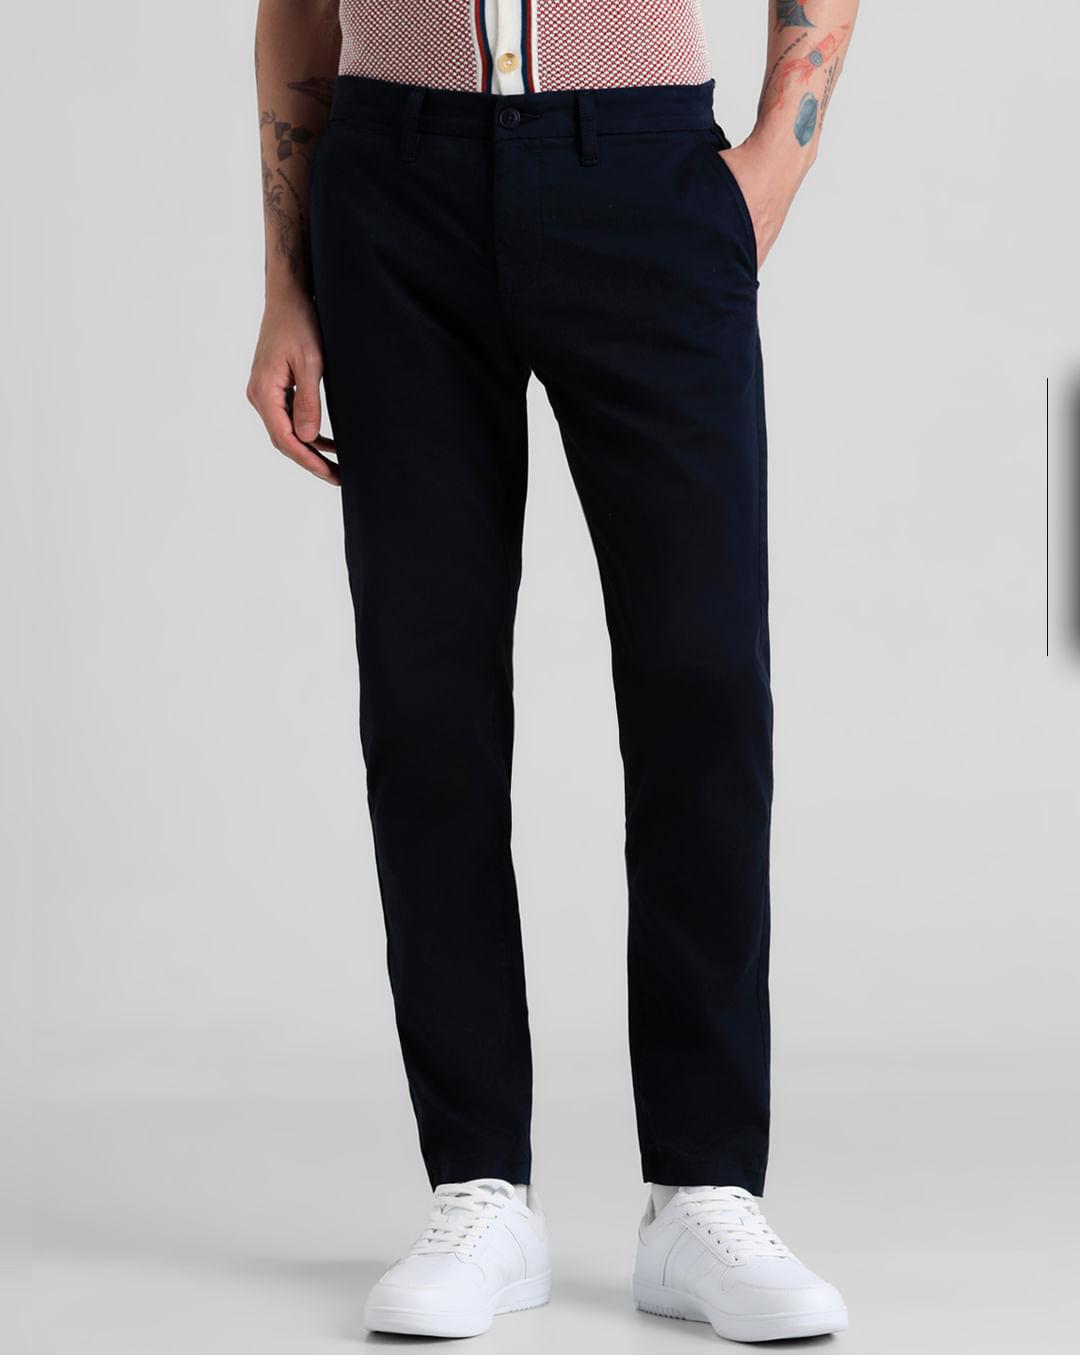 navy blue mid rise overdyed pants